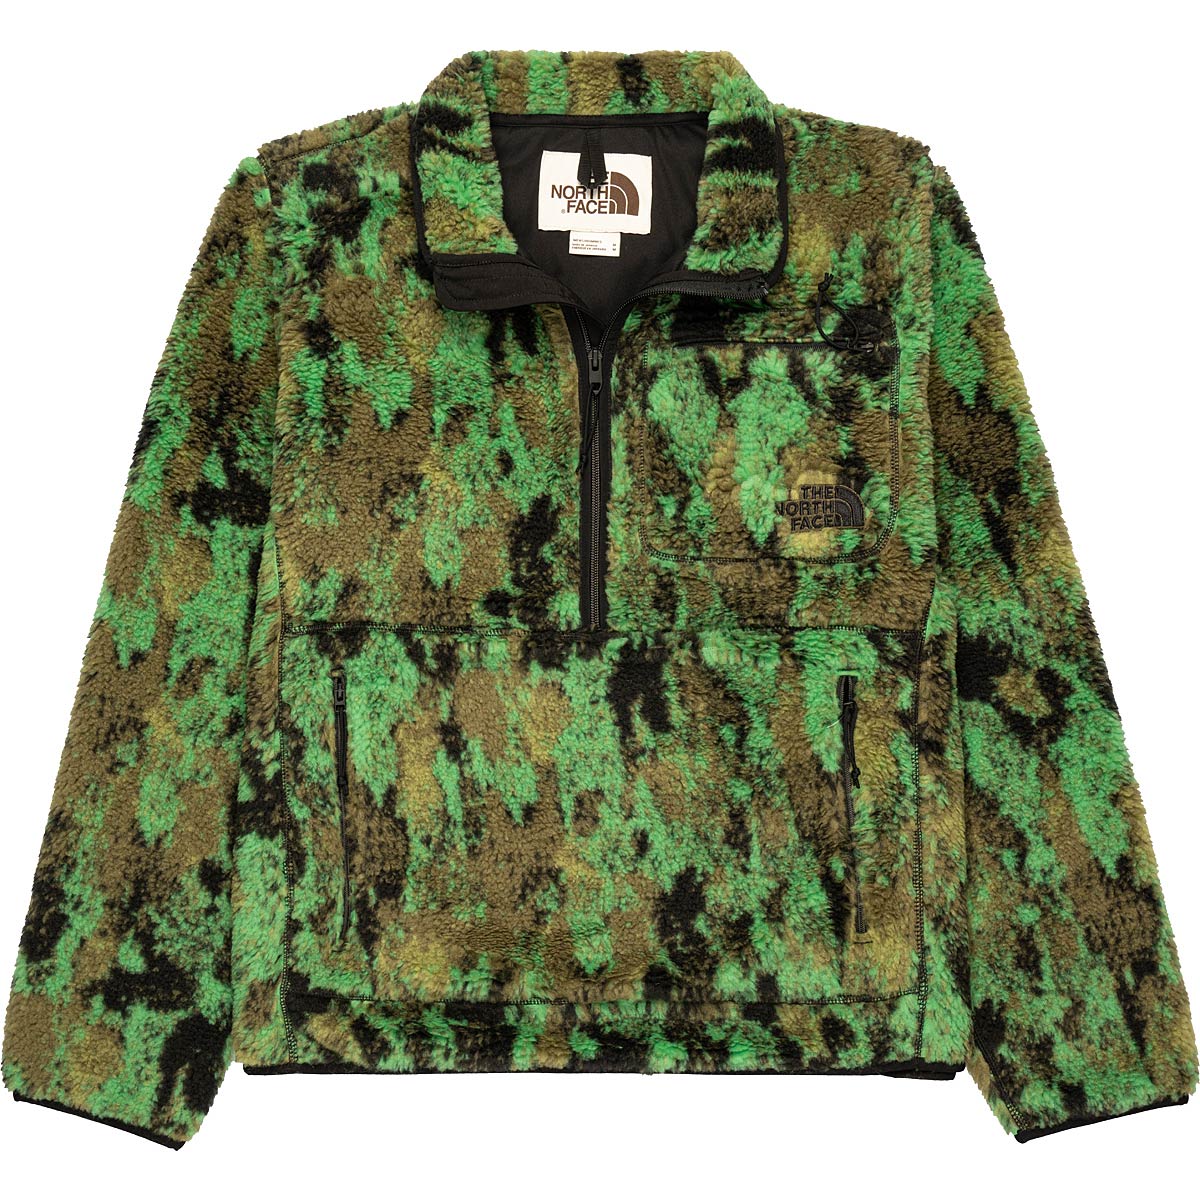 Image of The North Face Extreme Pile Pullover, Dark Green